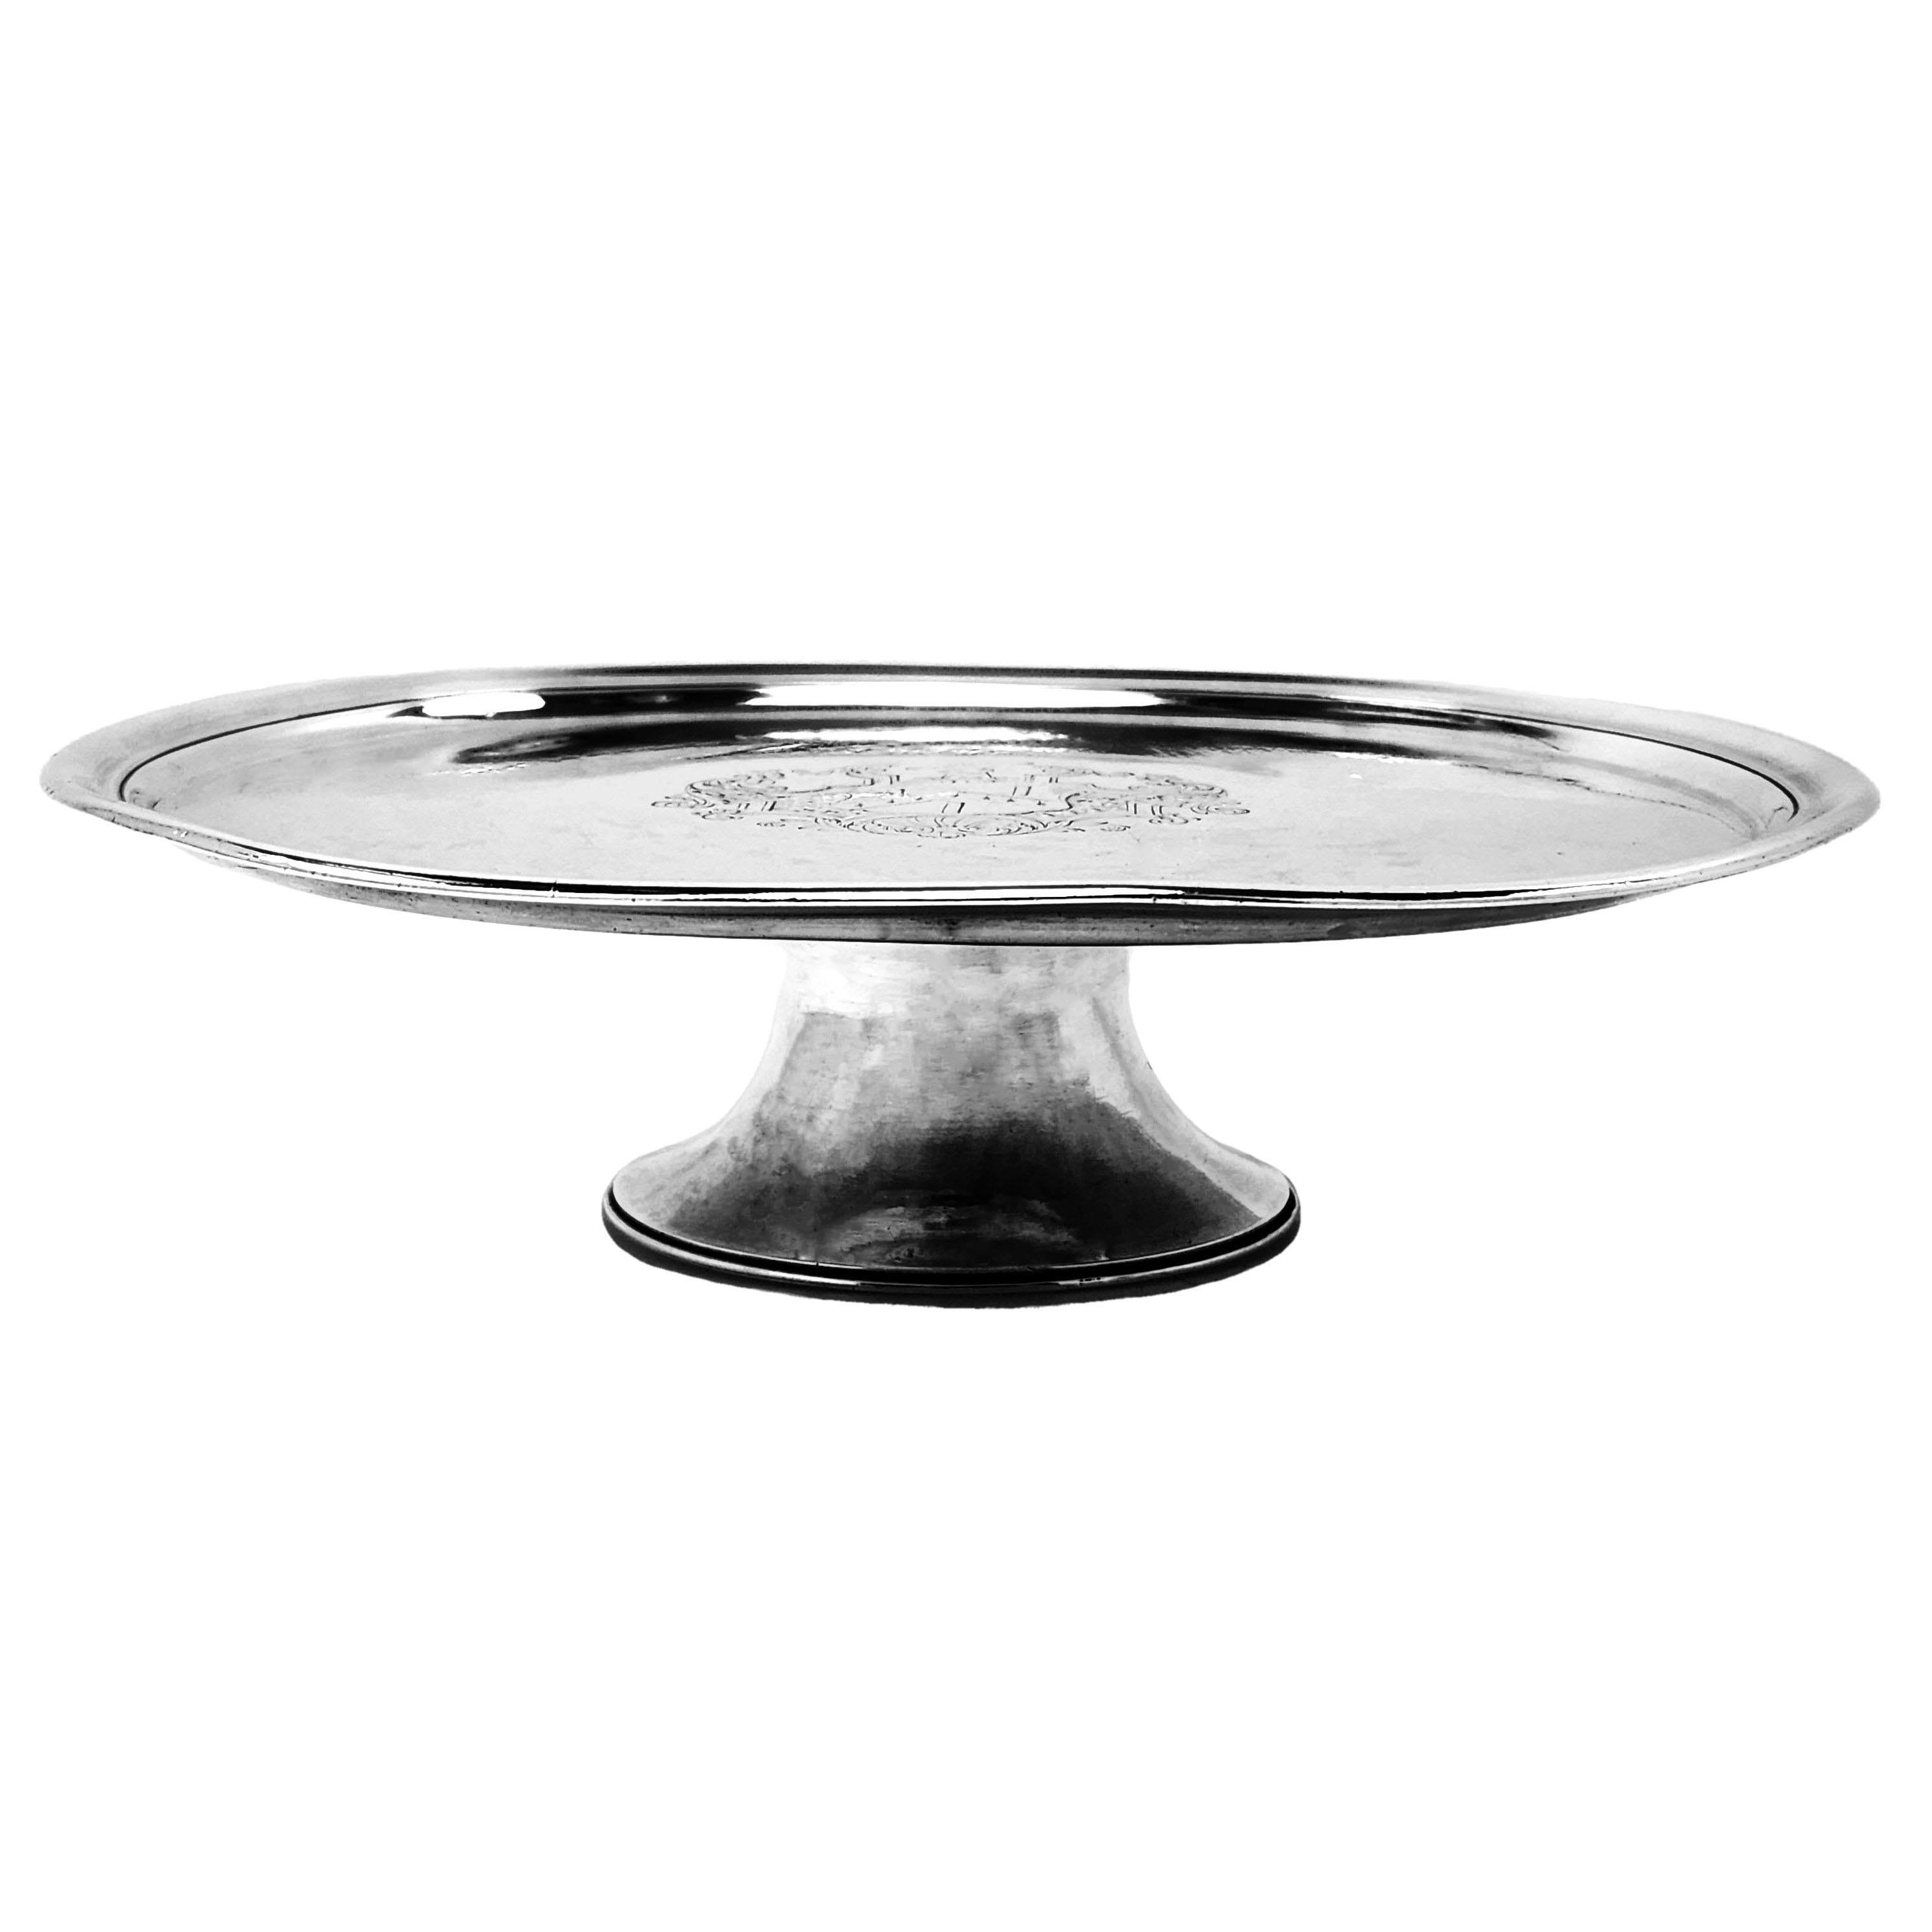 A classic Antique Irish George II Sterling Silver Tazza standing on a spread foot and embellished with an ornate crest on the top. 

Made in Dublin, Ireland in 1738 by Alexander D Brown

Approx. Weight – 372g / 11.96oz
Approx. Height – 4.9cm
Approx.